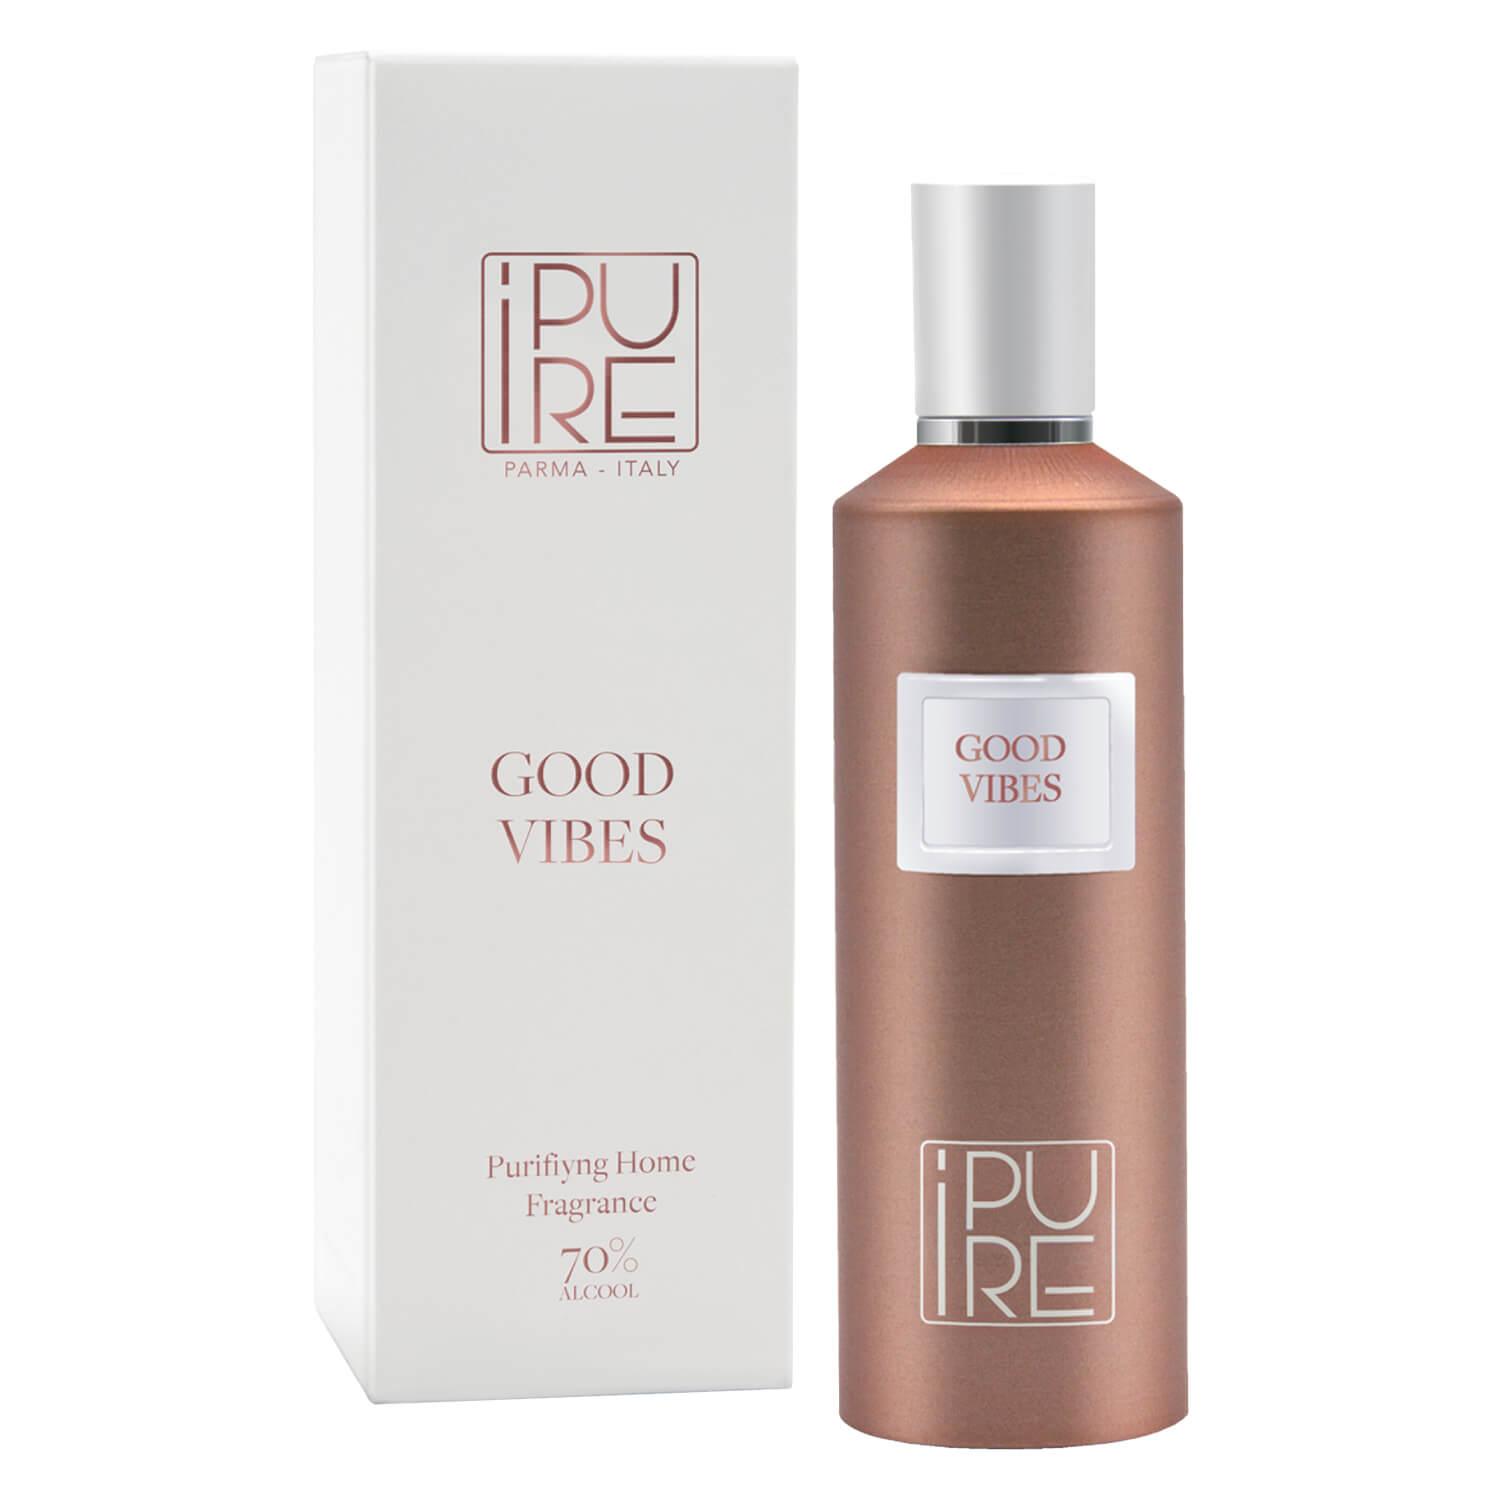 iPURE - Purifying Home Fragrance Spray GOOD VIBES